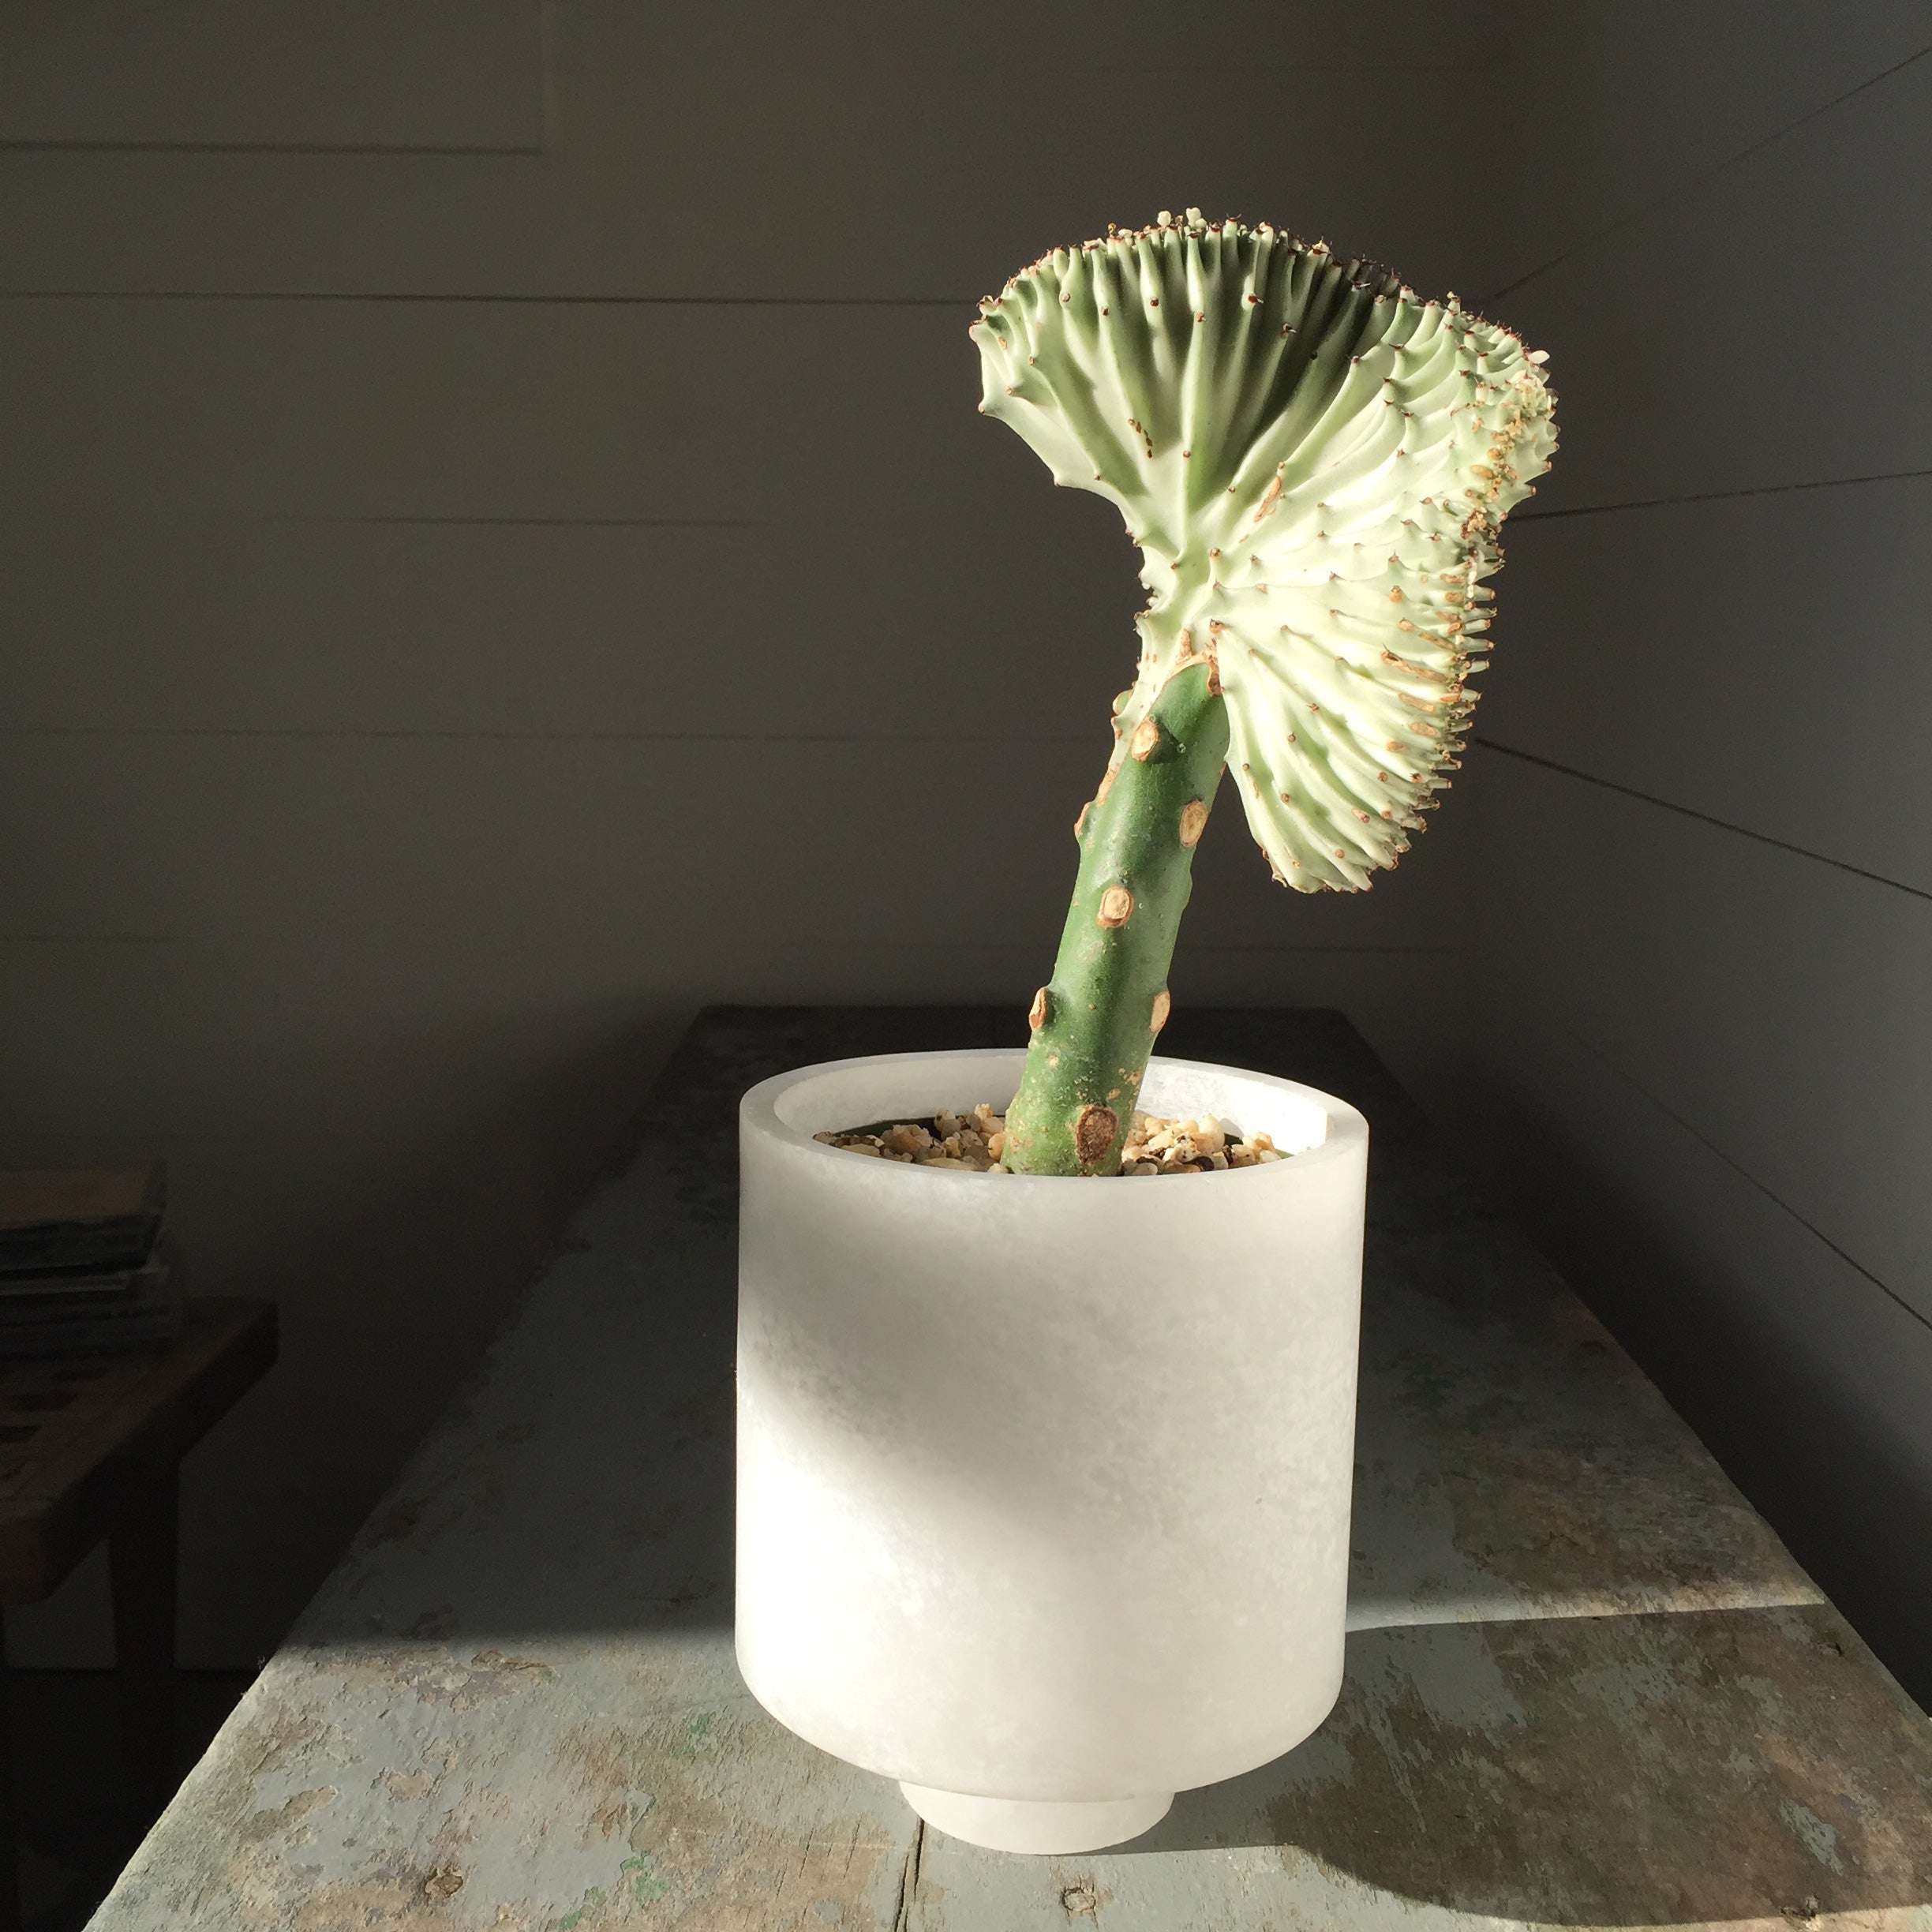 Image of M+A NYC Cylindrical Planter 5" Diameter in Alabaster planted with a coral cactus that is facing the rising sun all aglow.